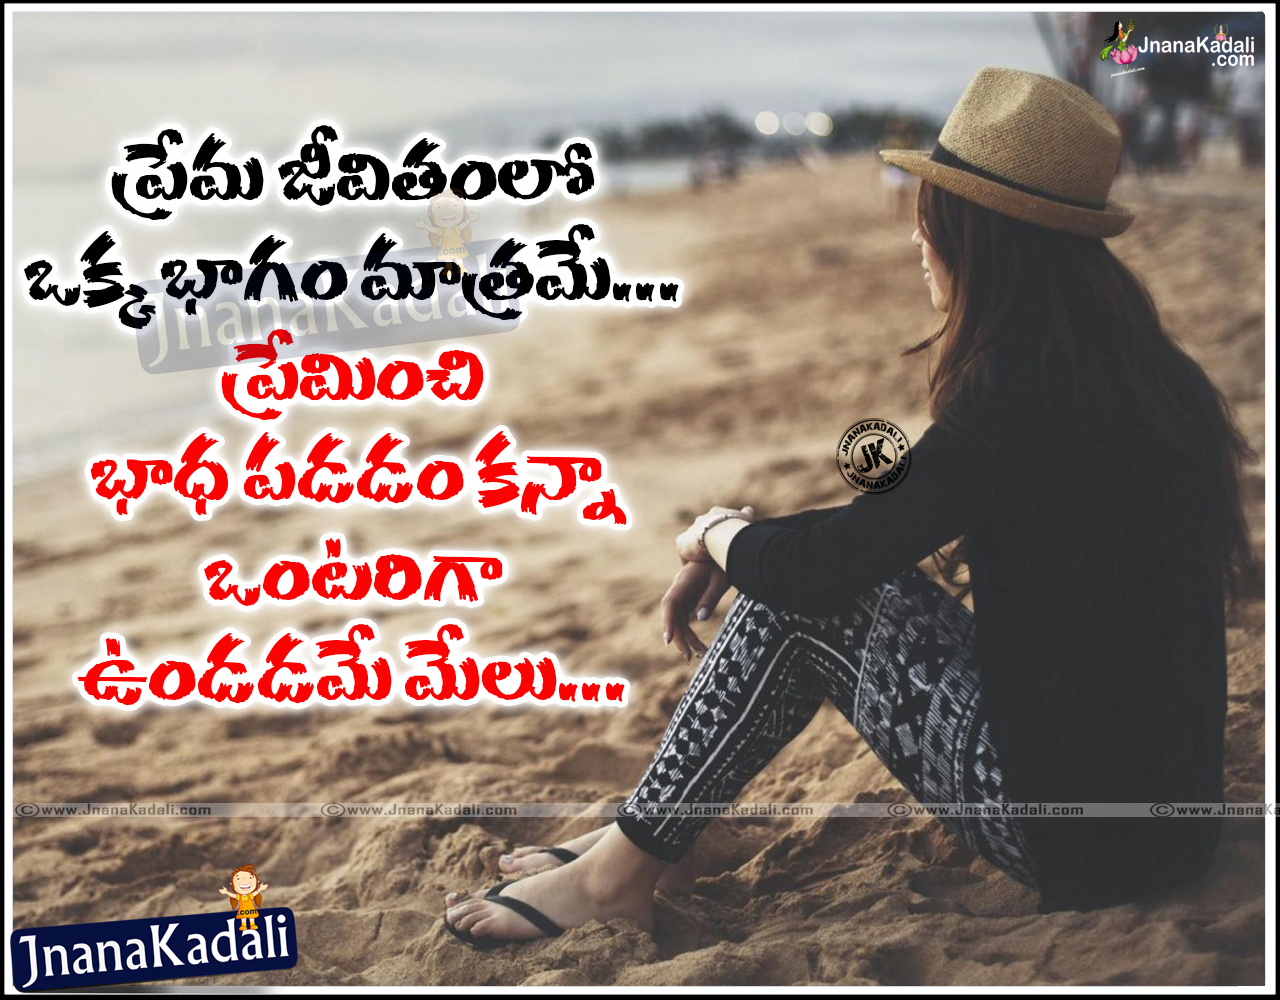 Telugu Love Failure and Miss You Quotations Images Free | JNANA ...